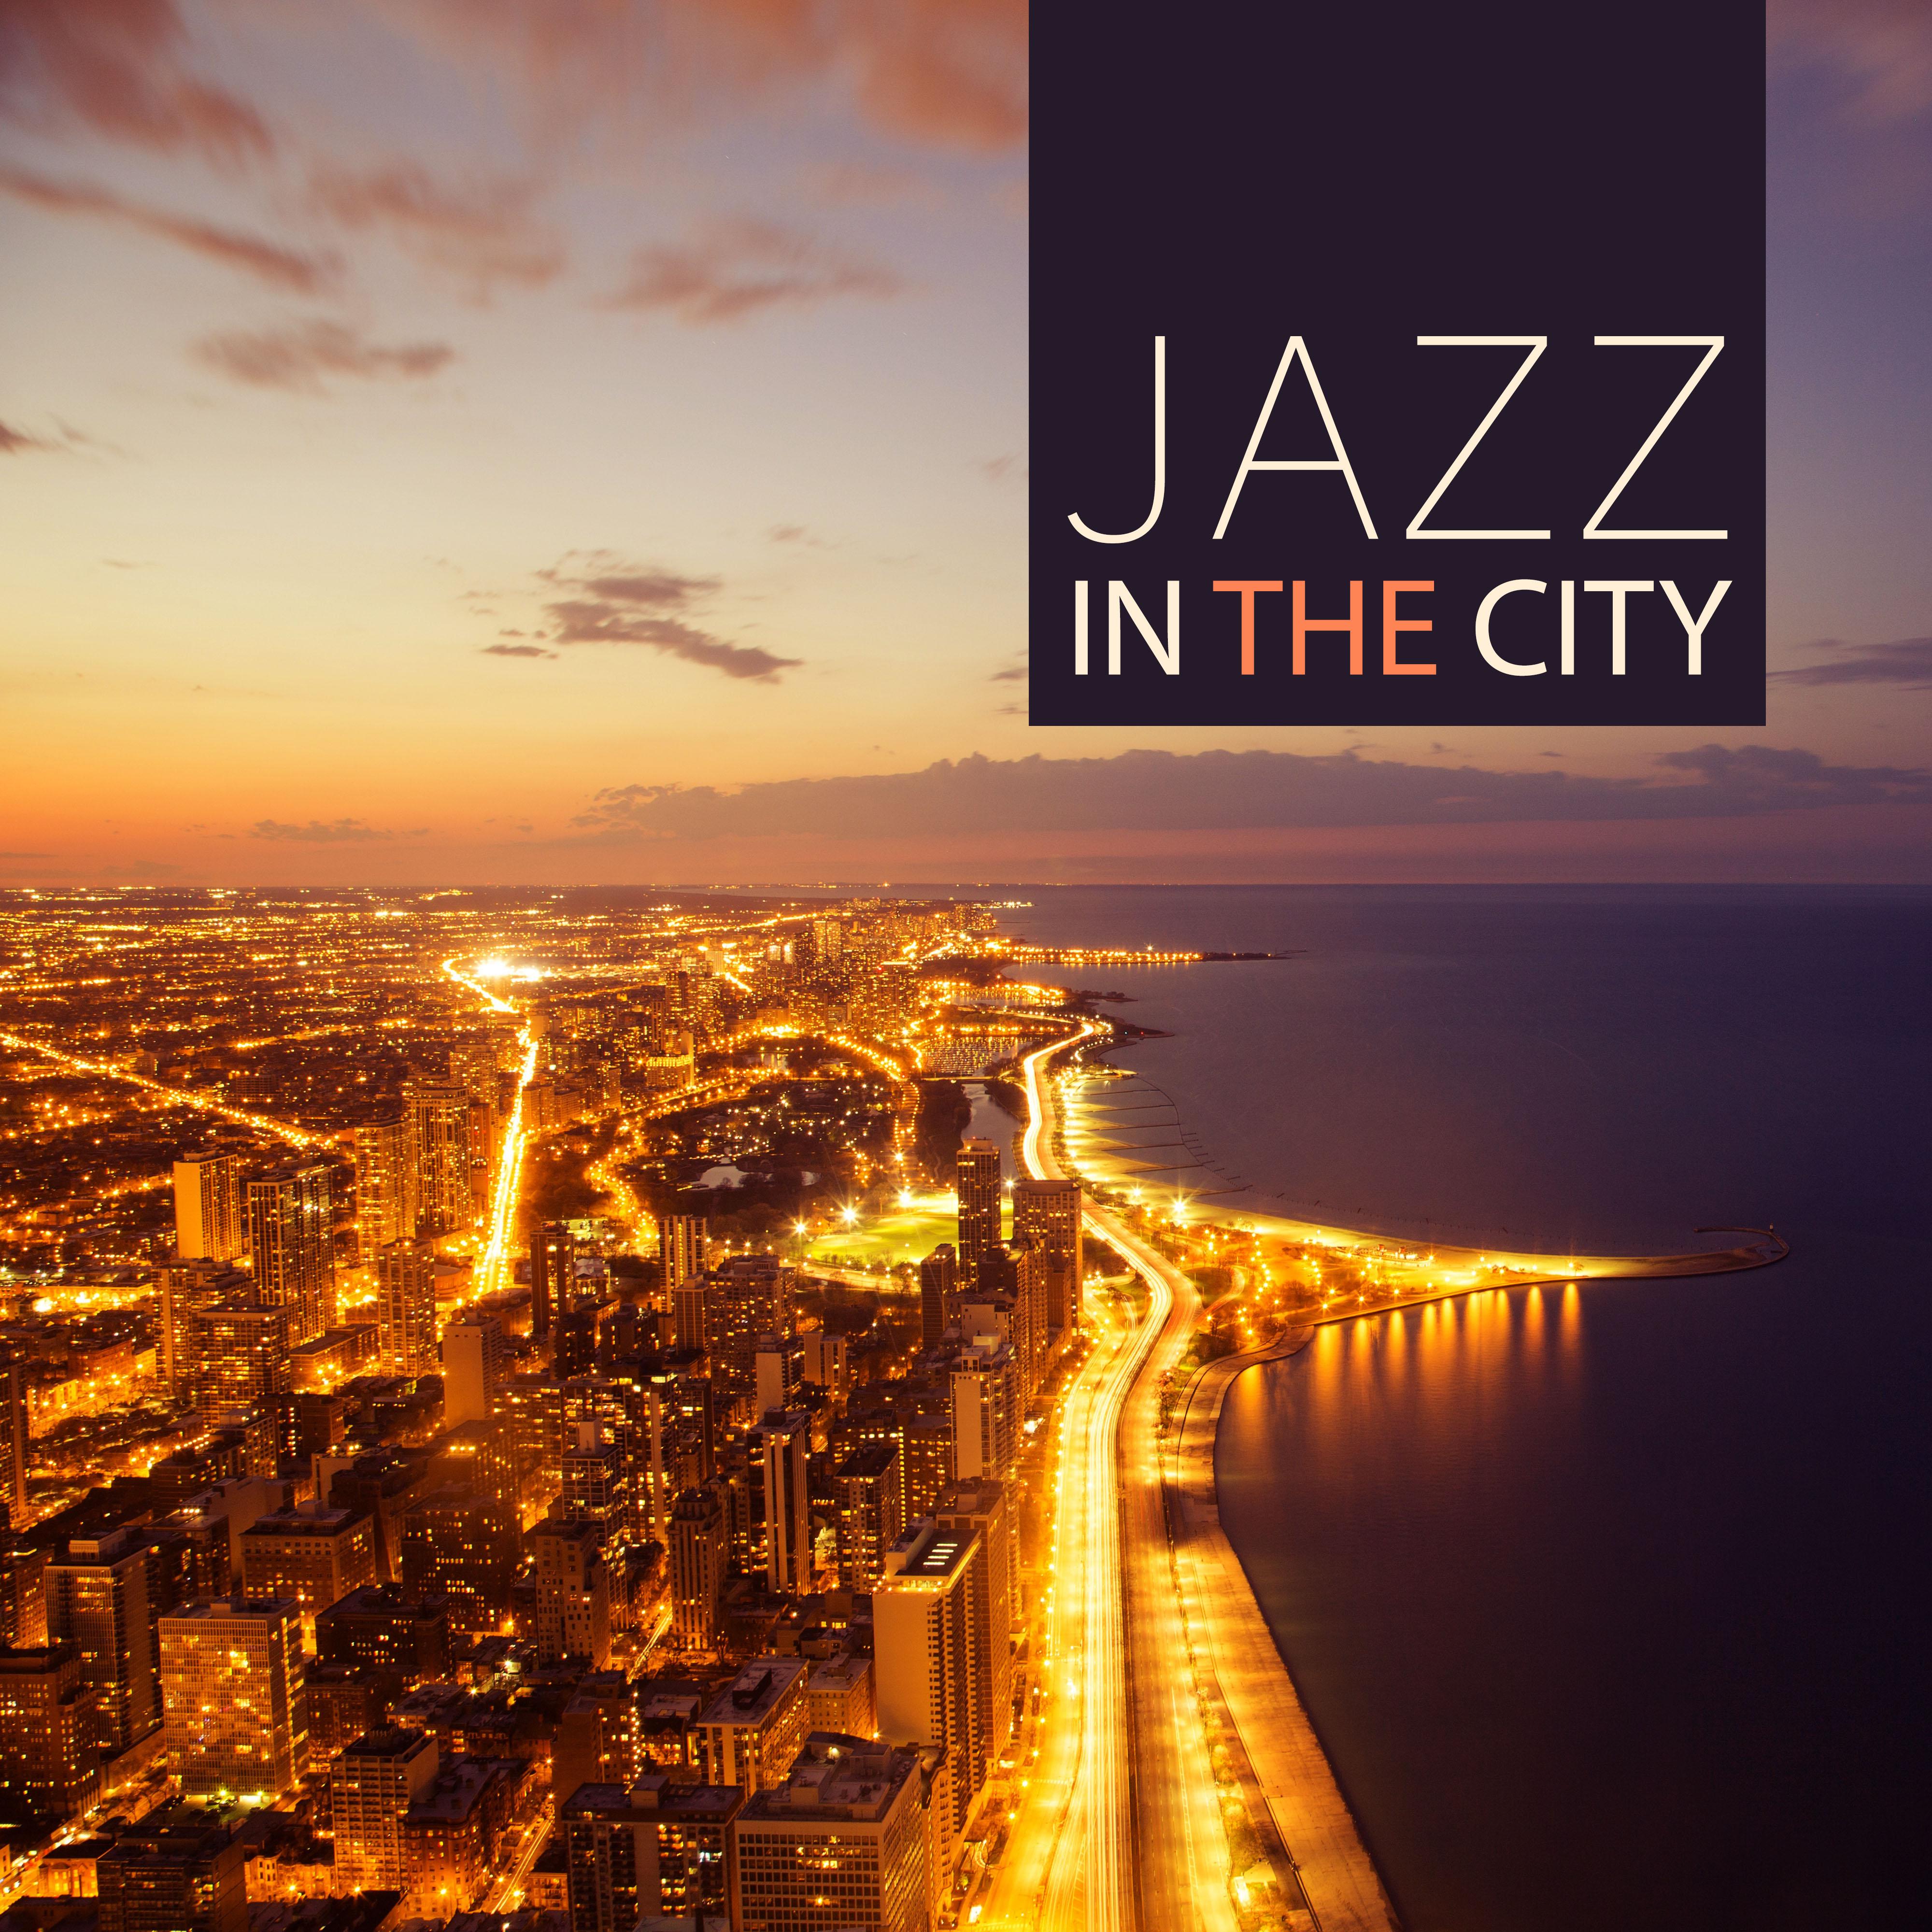 Jazz in The City  Smooth Jazz Sounds for Relax Time, Mellow Jazz Music for Jazz Club  Bar